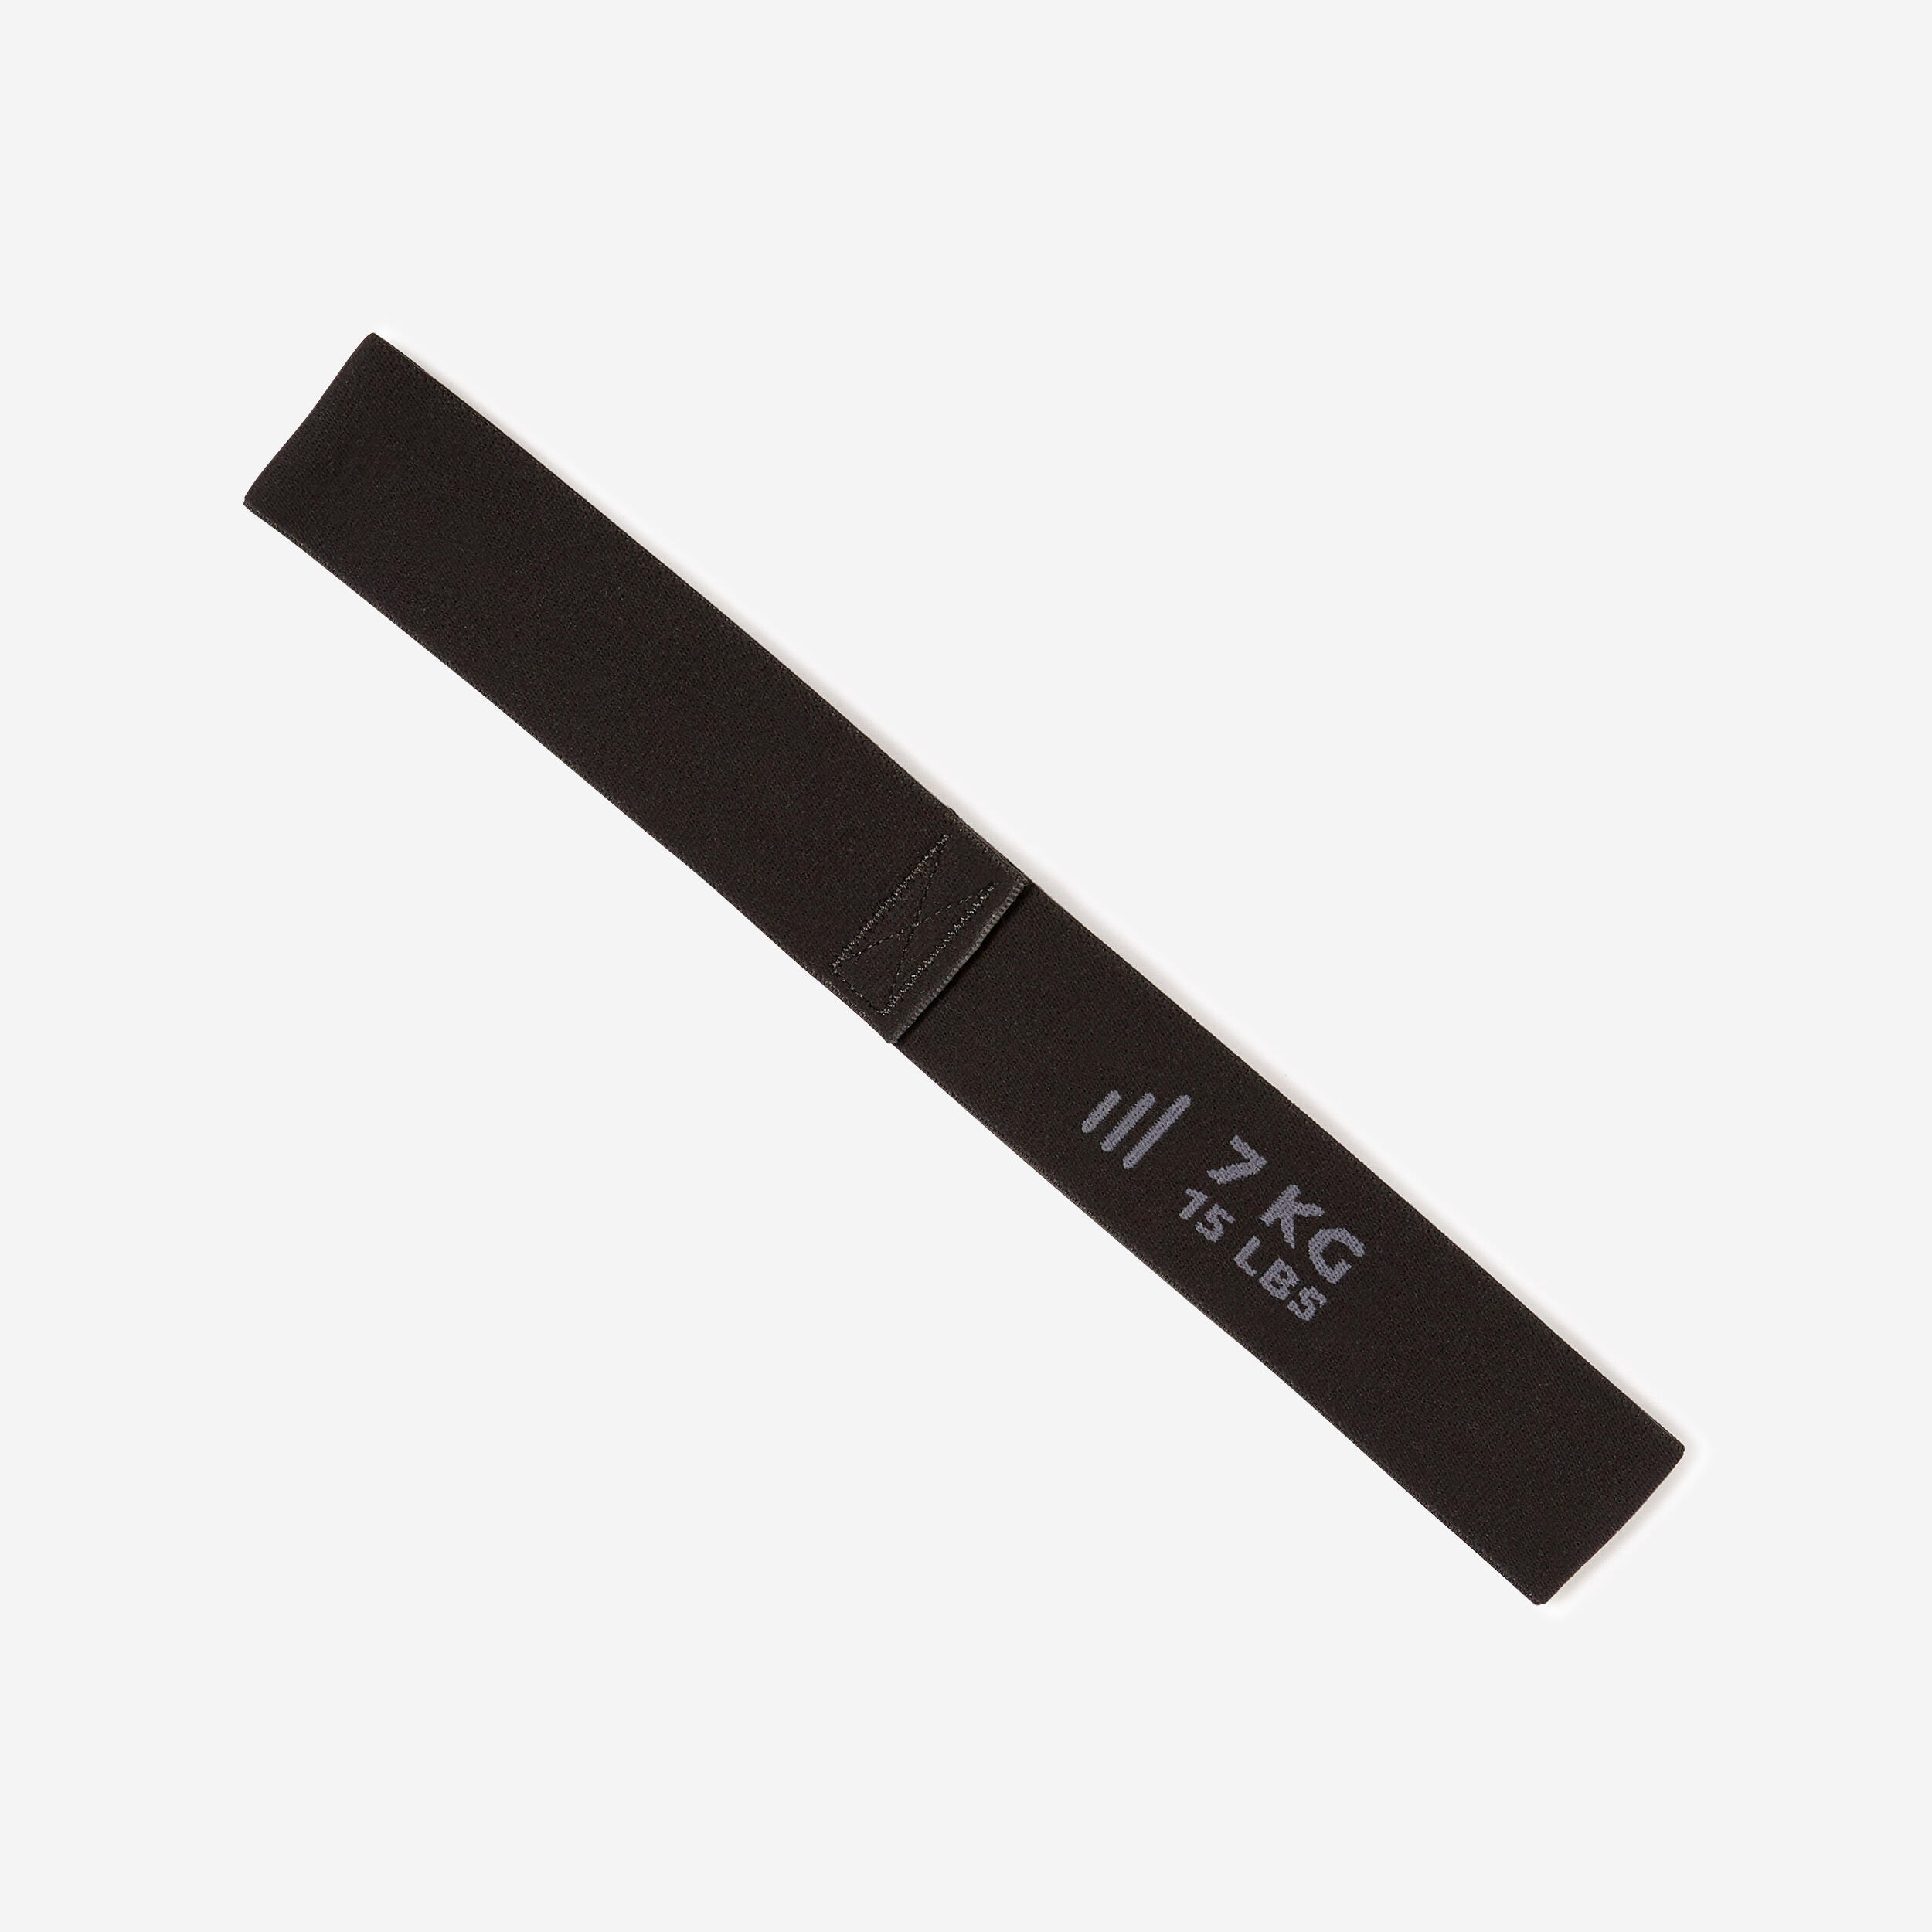 Fitness Short Fabric Resistance Band (15 lb/7 kg) - Black - No Size By DOMYOS | Decathlon